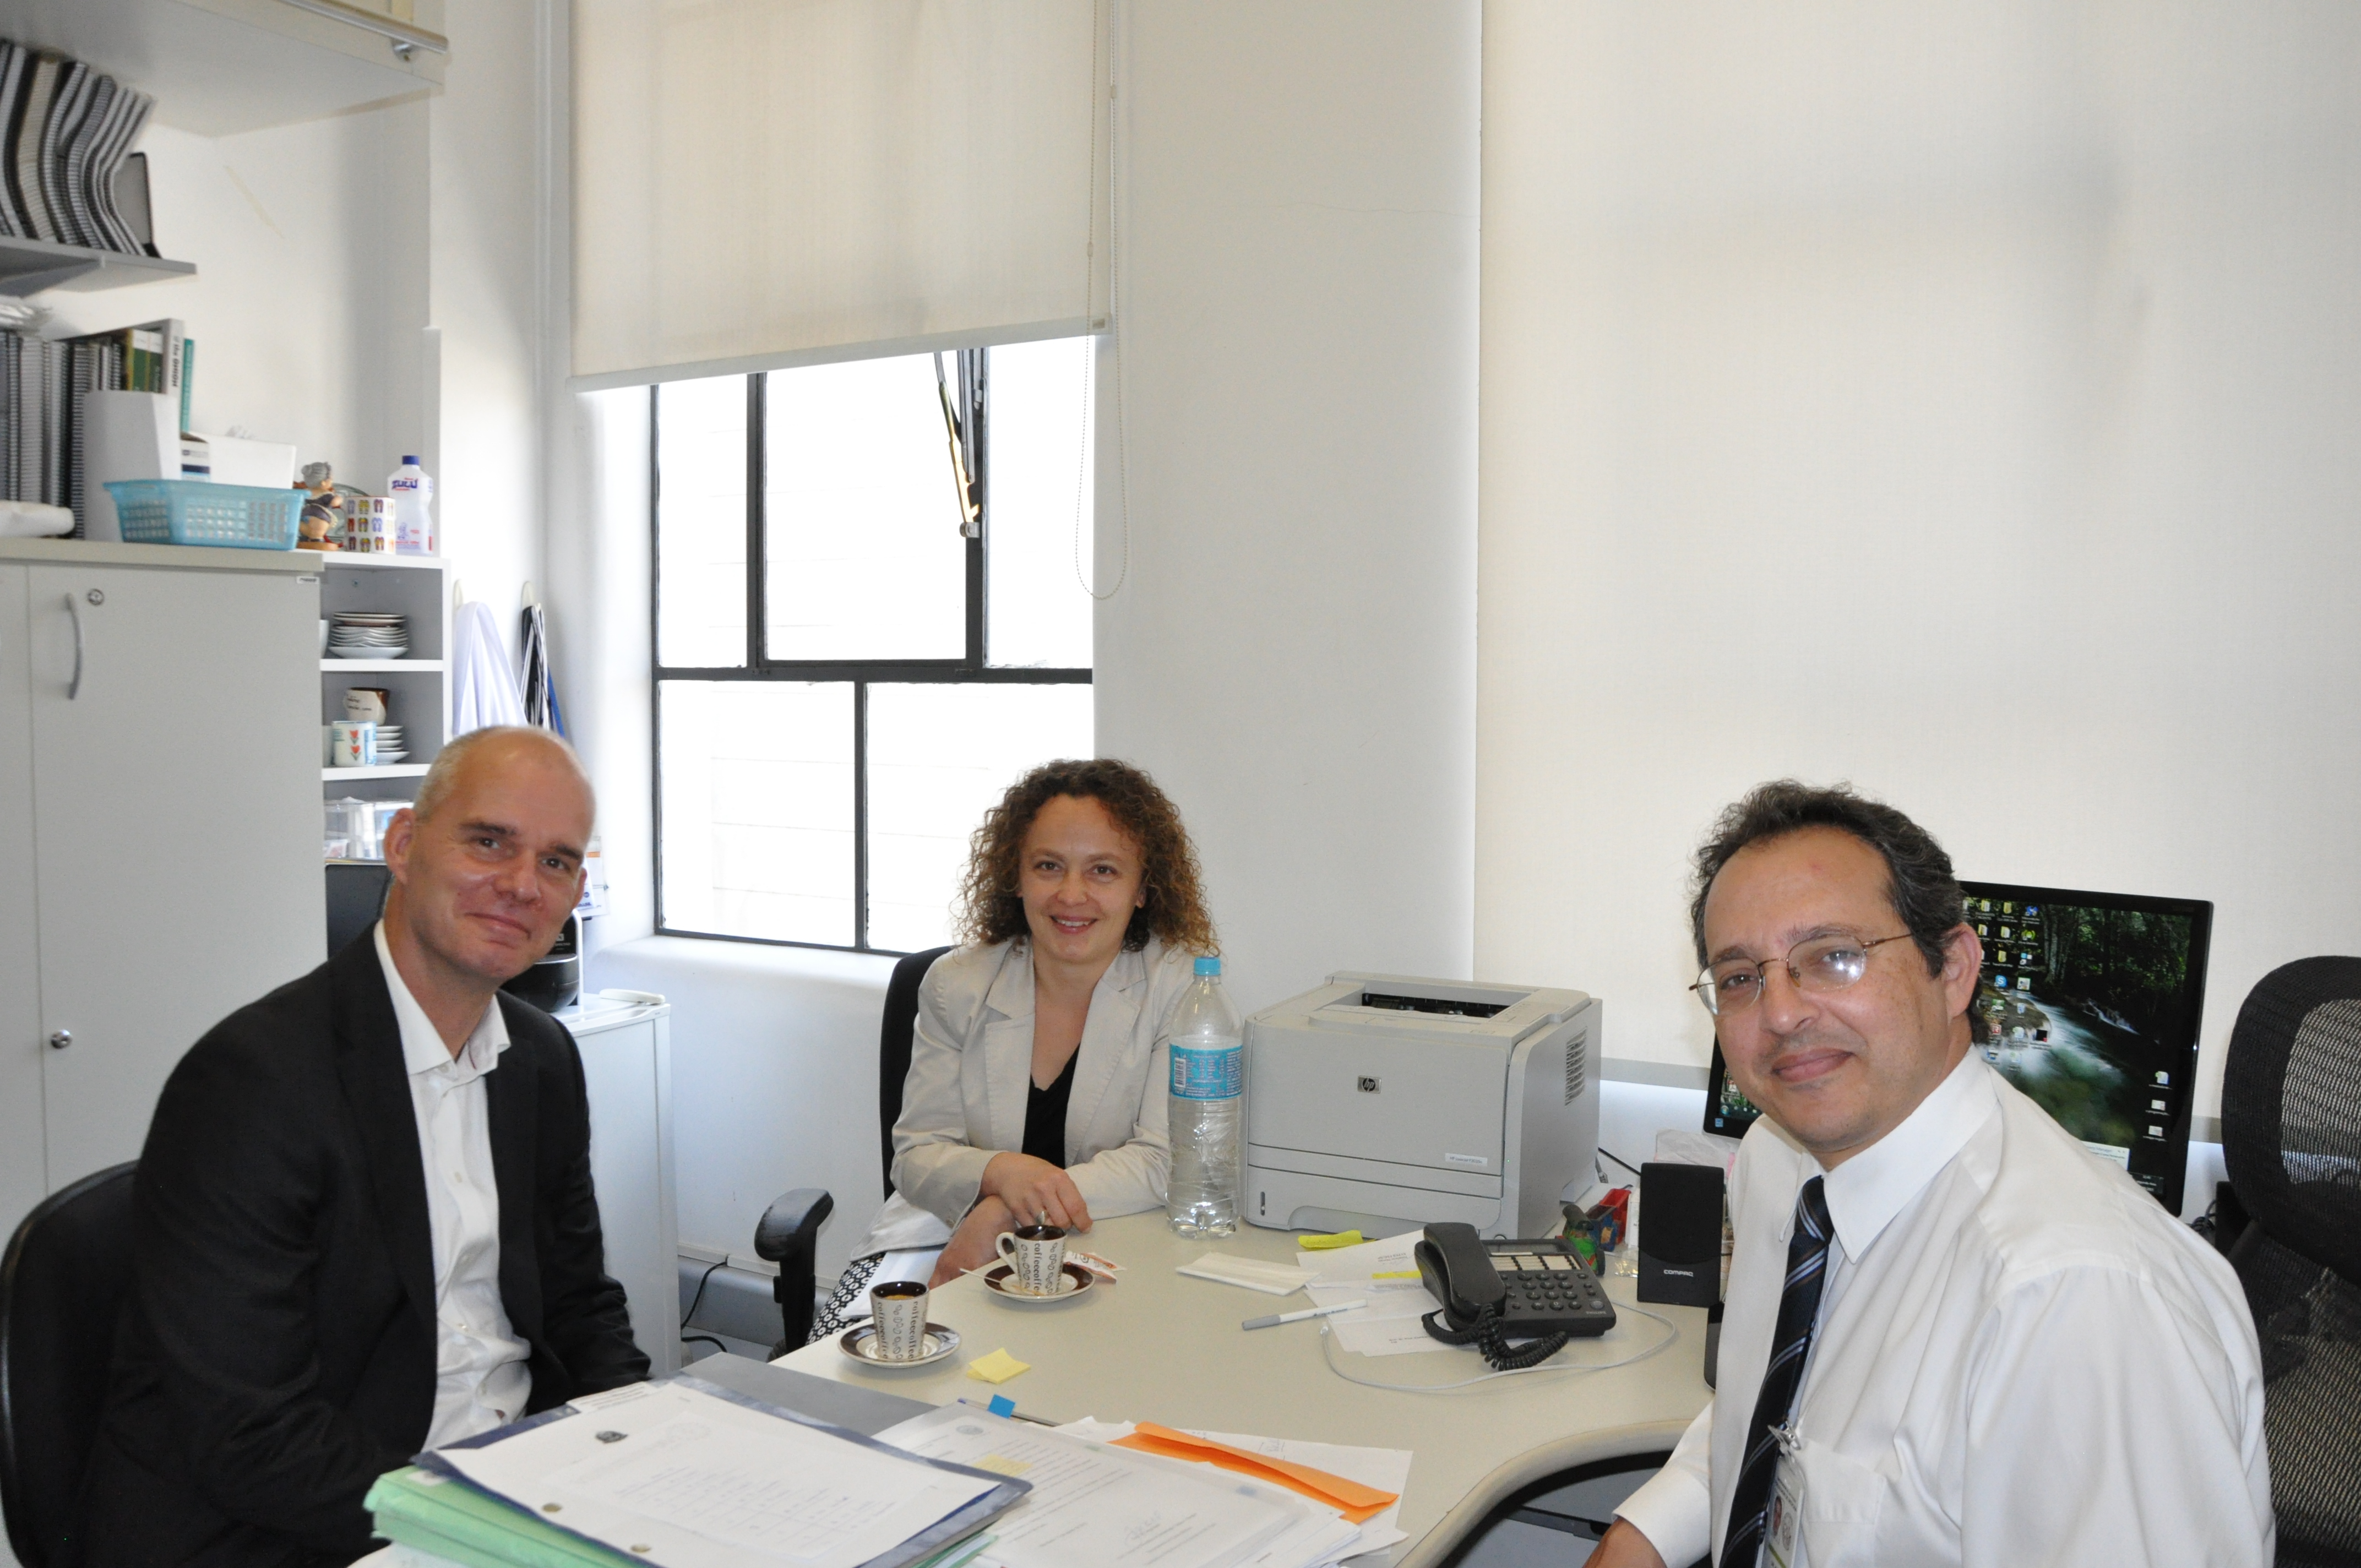 In talks with Prof. Esper Kallás (right) from the Faculty of Medicine at the University of São Paulo